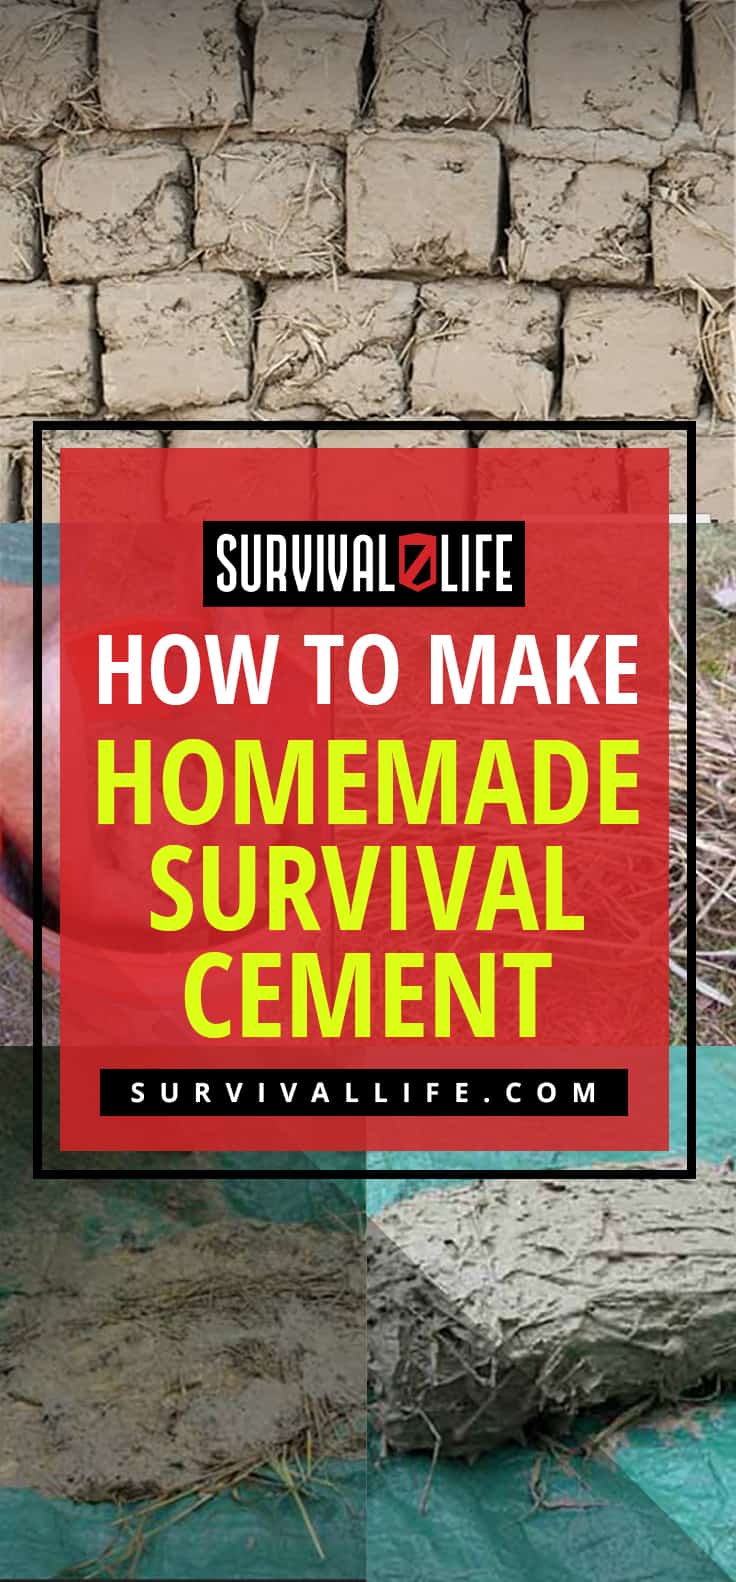 How To Make Homemade Survival Cement